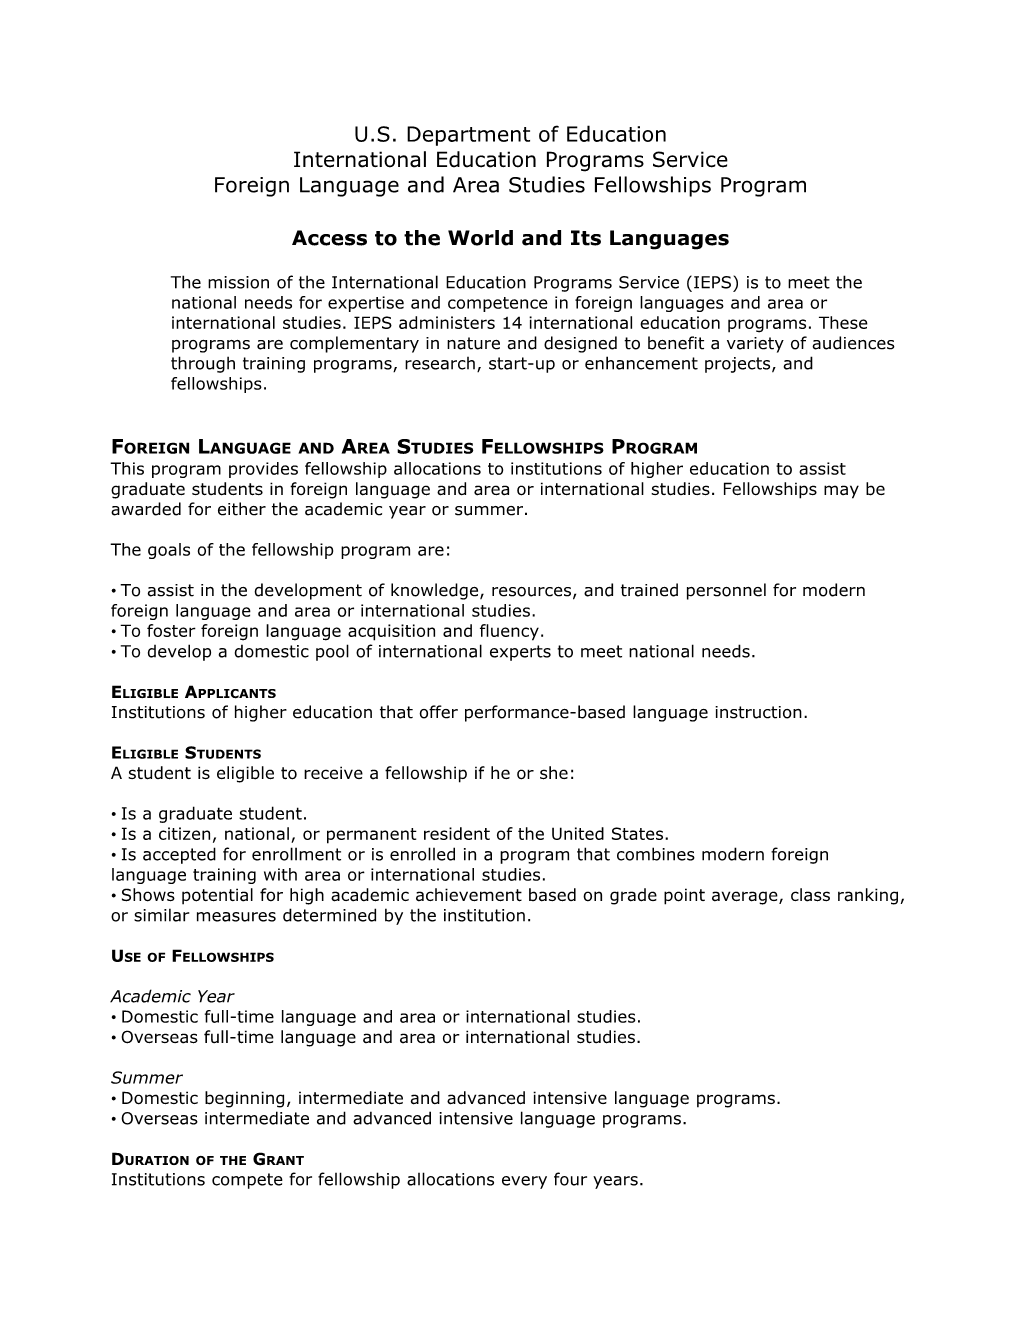 Foreign Language and Area Studies Fellowships Program - Brochure (MS Word)